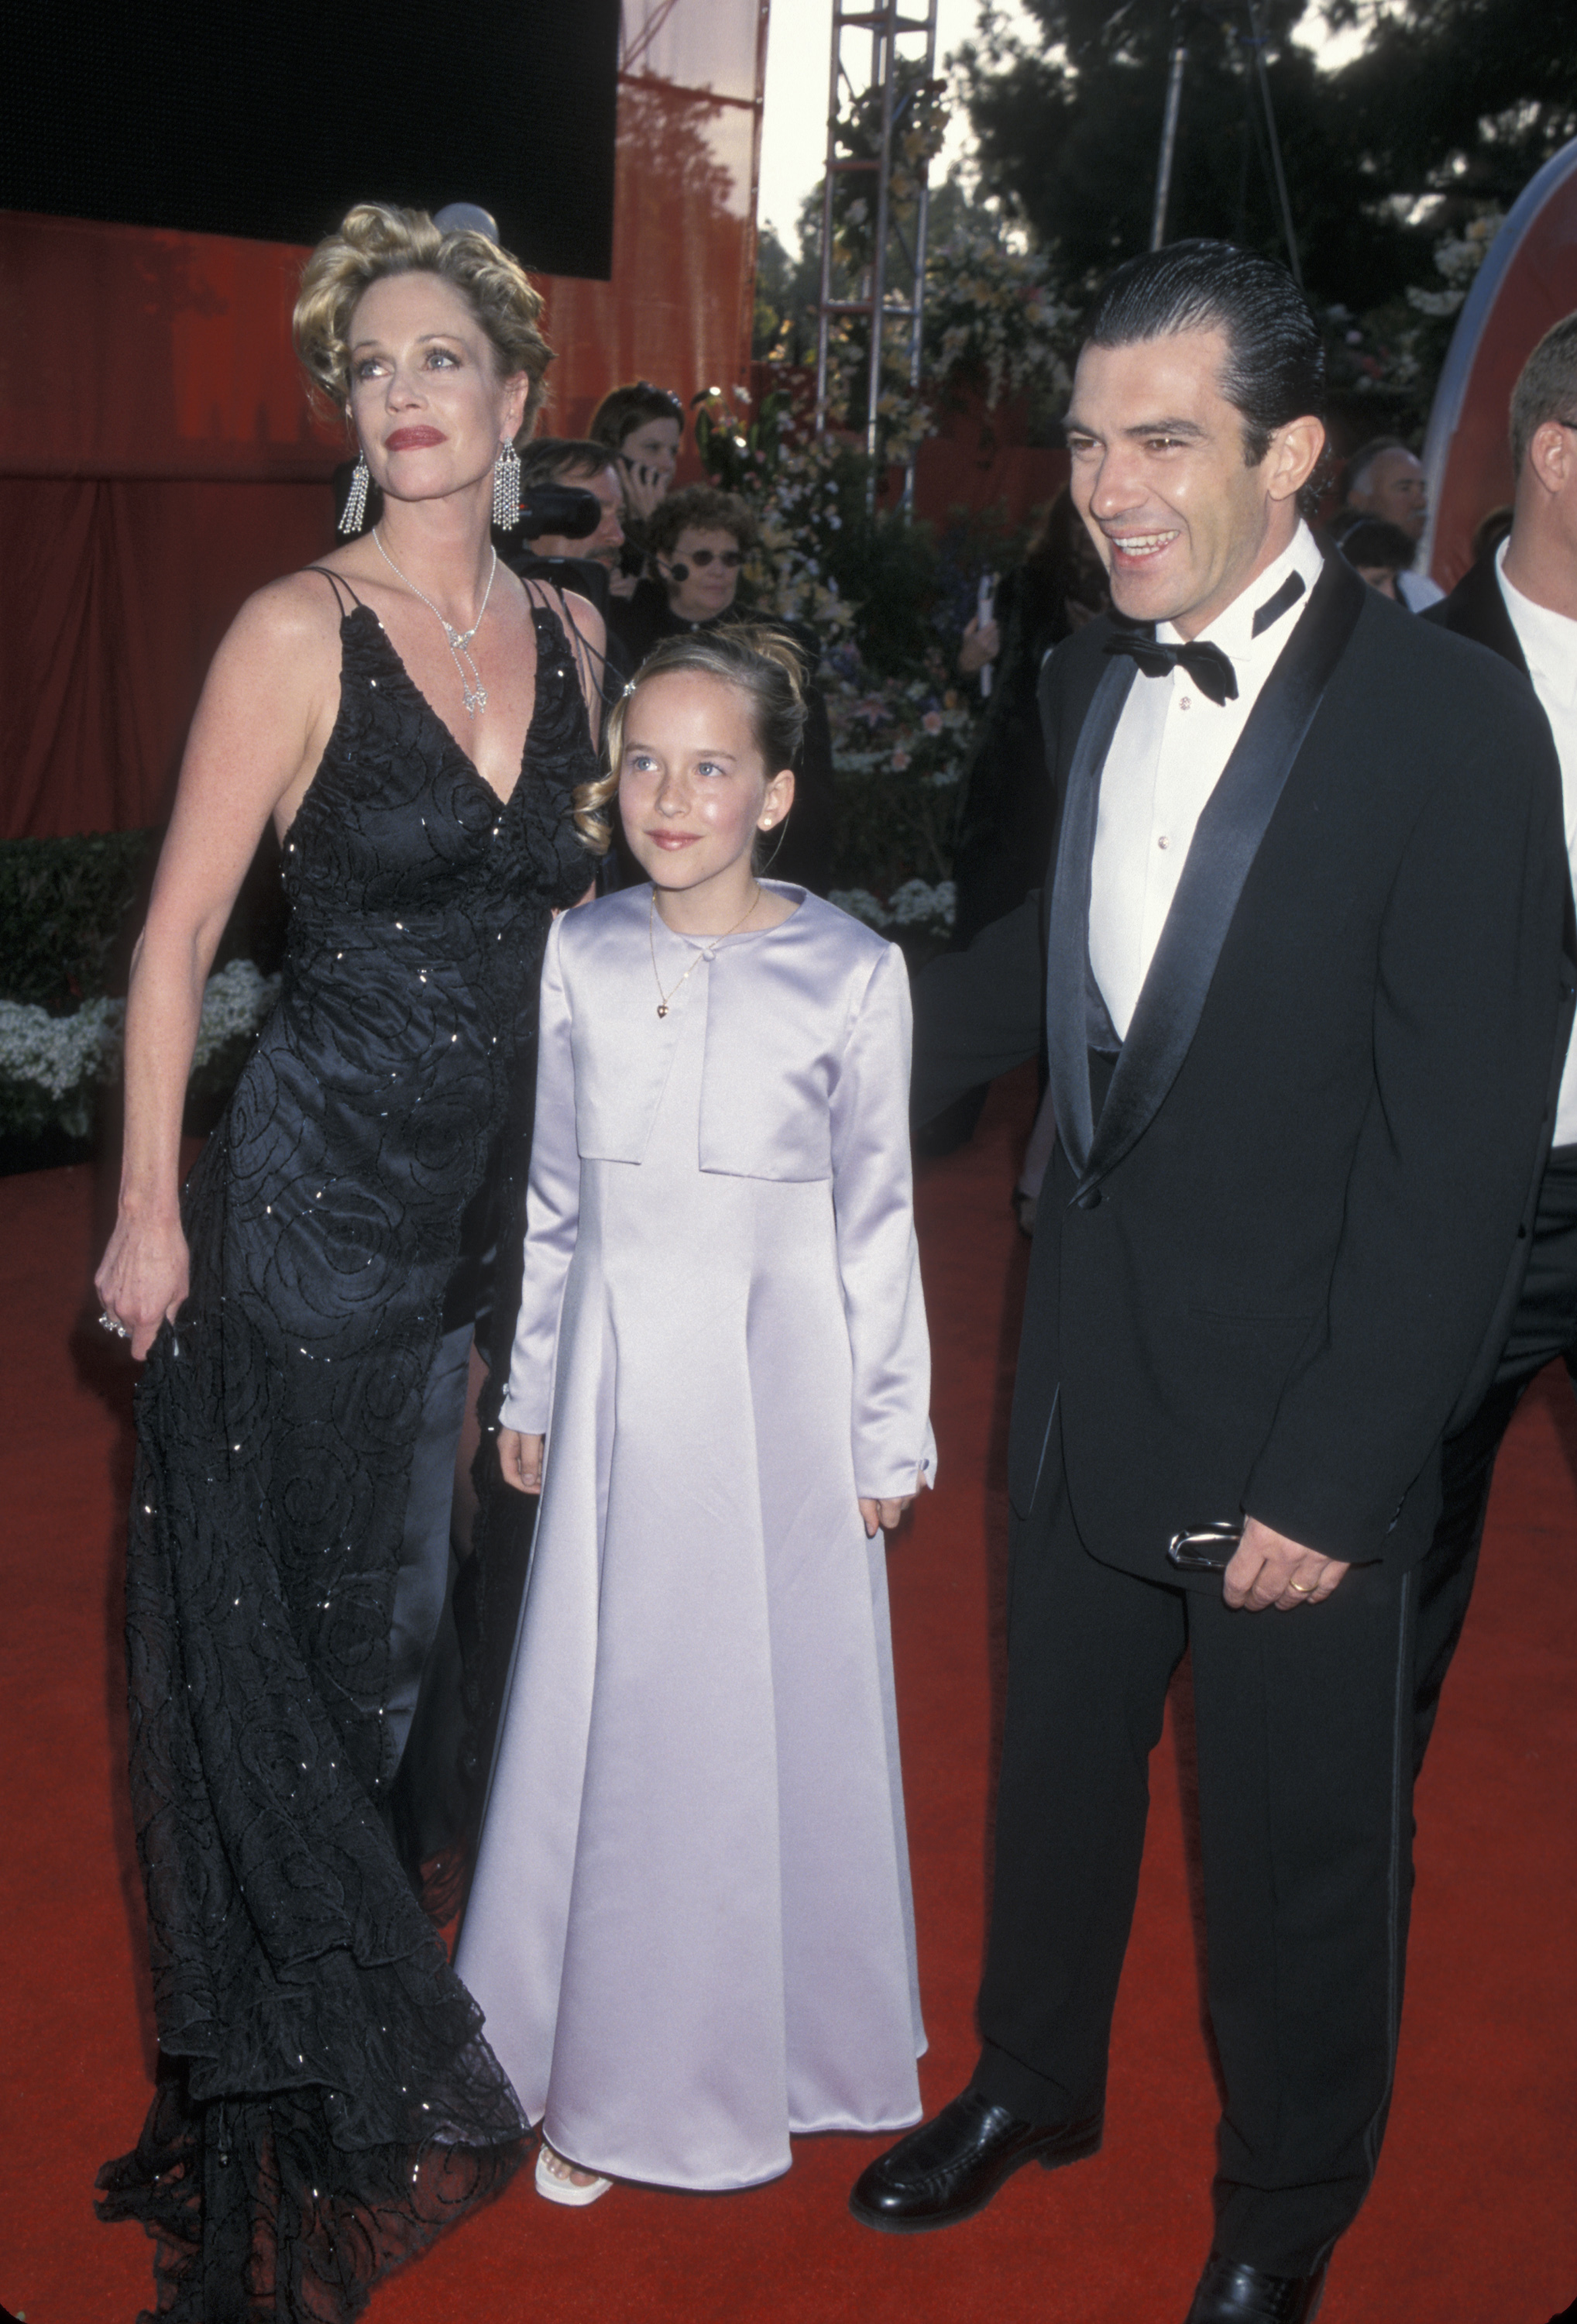 Melanie Griffith, Dakota Johnson, and Antonio Banderas at the 72nd Annual Academy Awards on March 26, 2000 | Source: Getty Images